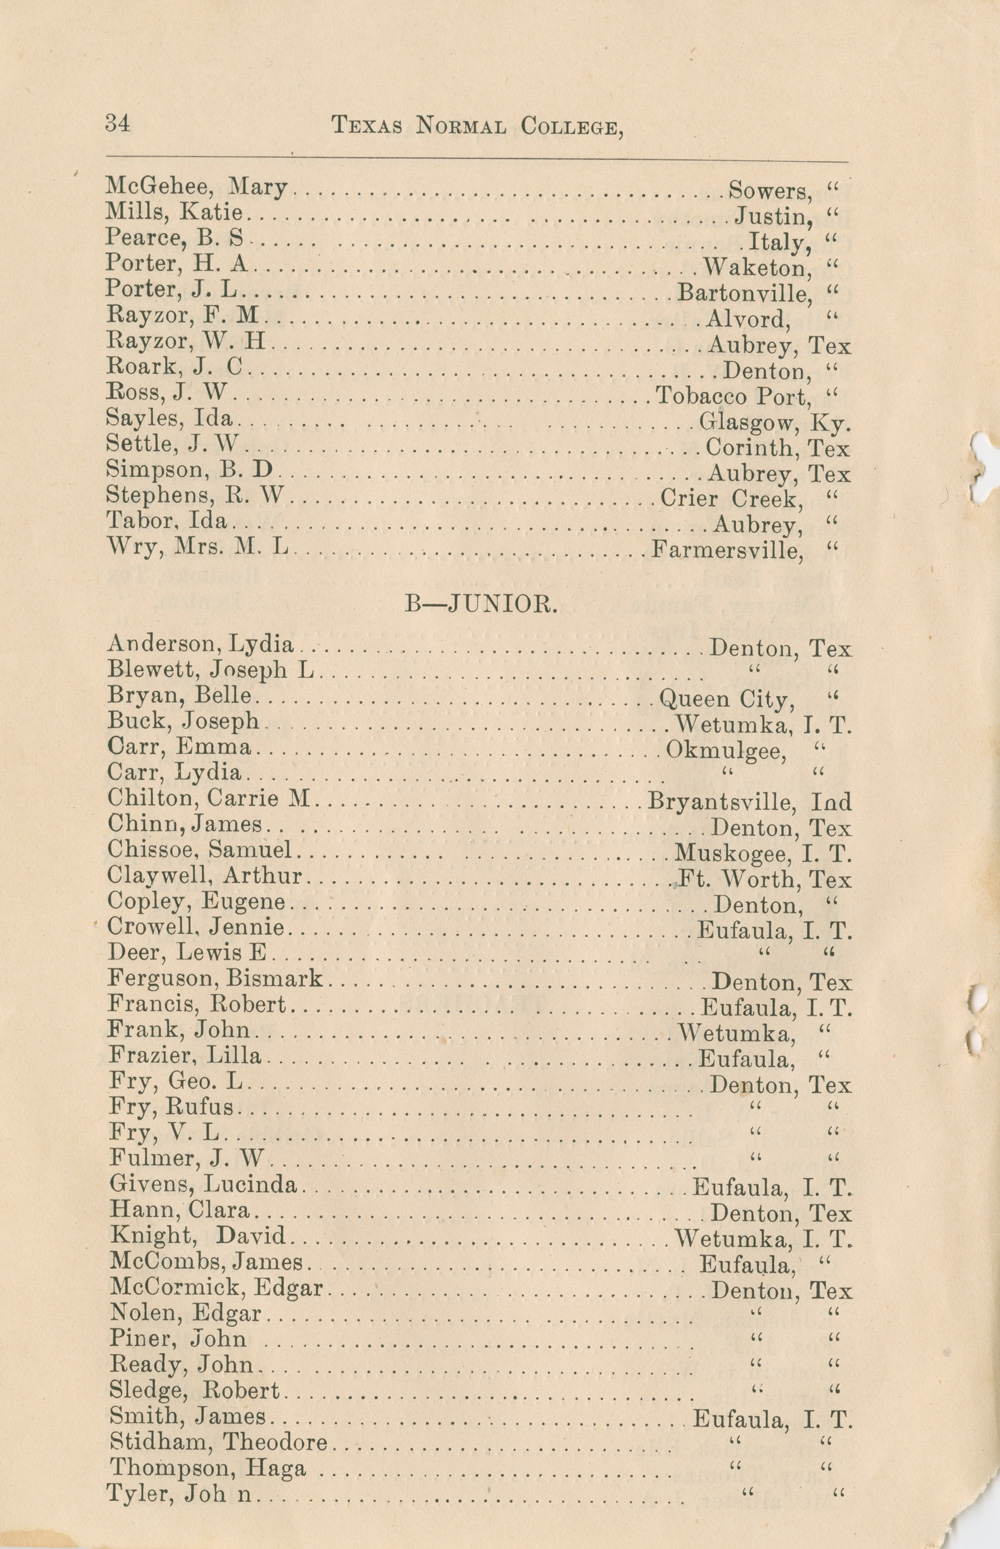 Student list page from 1890-91 Texas Normal College catalog